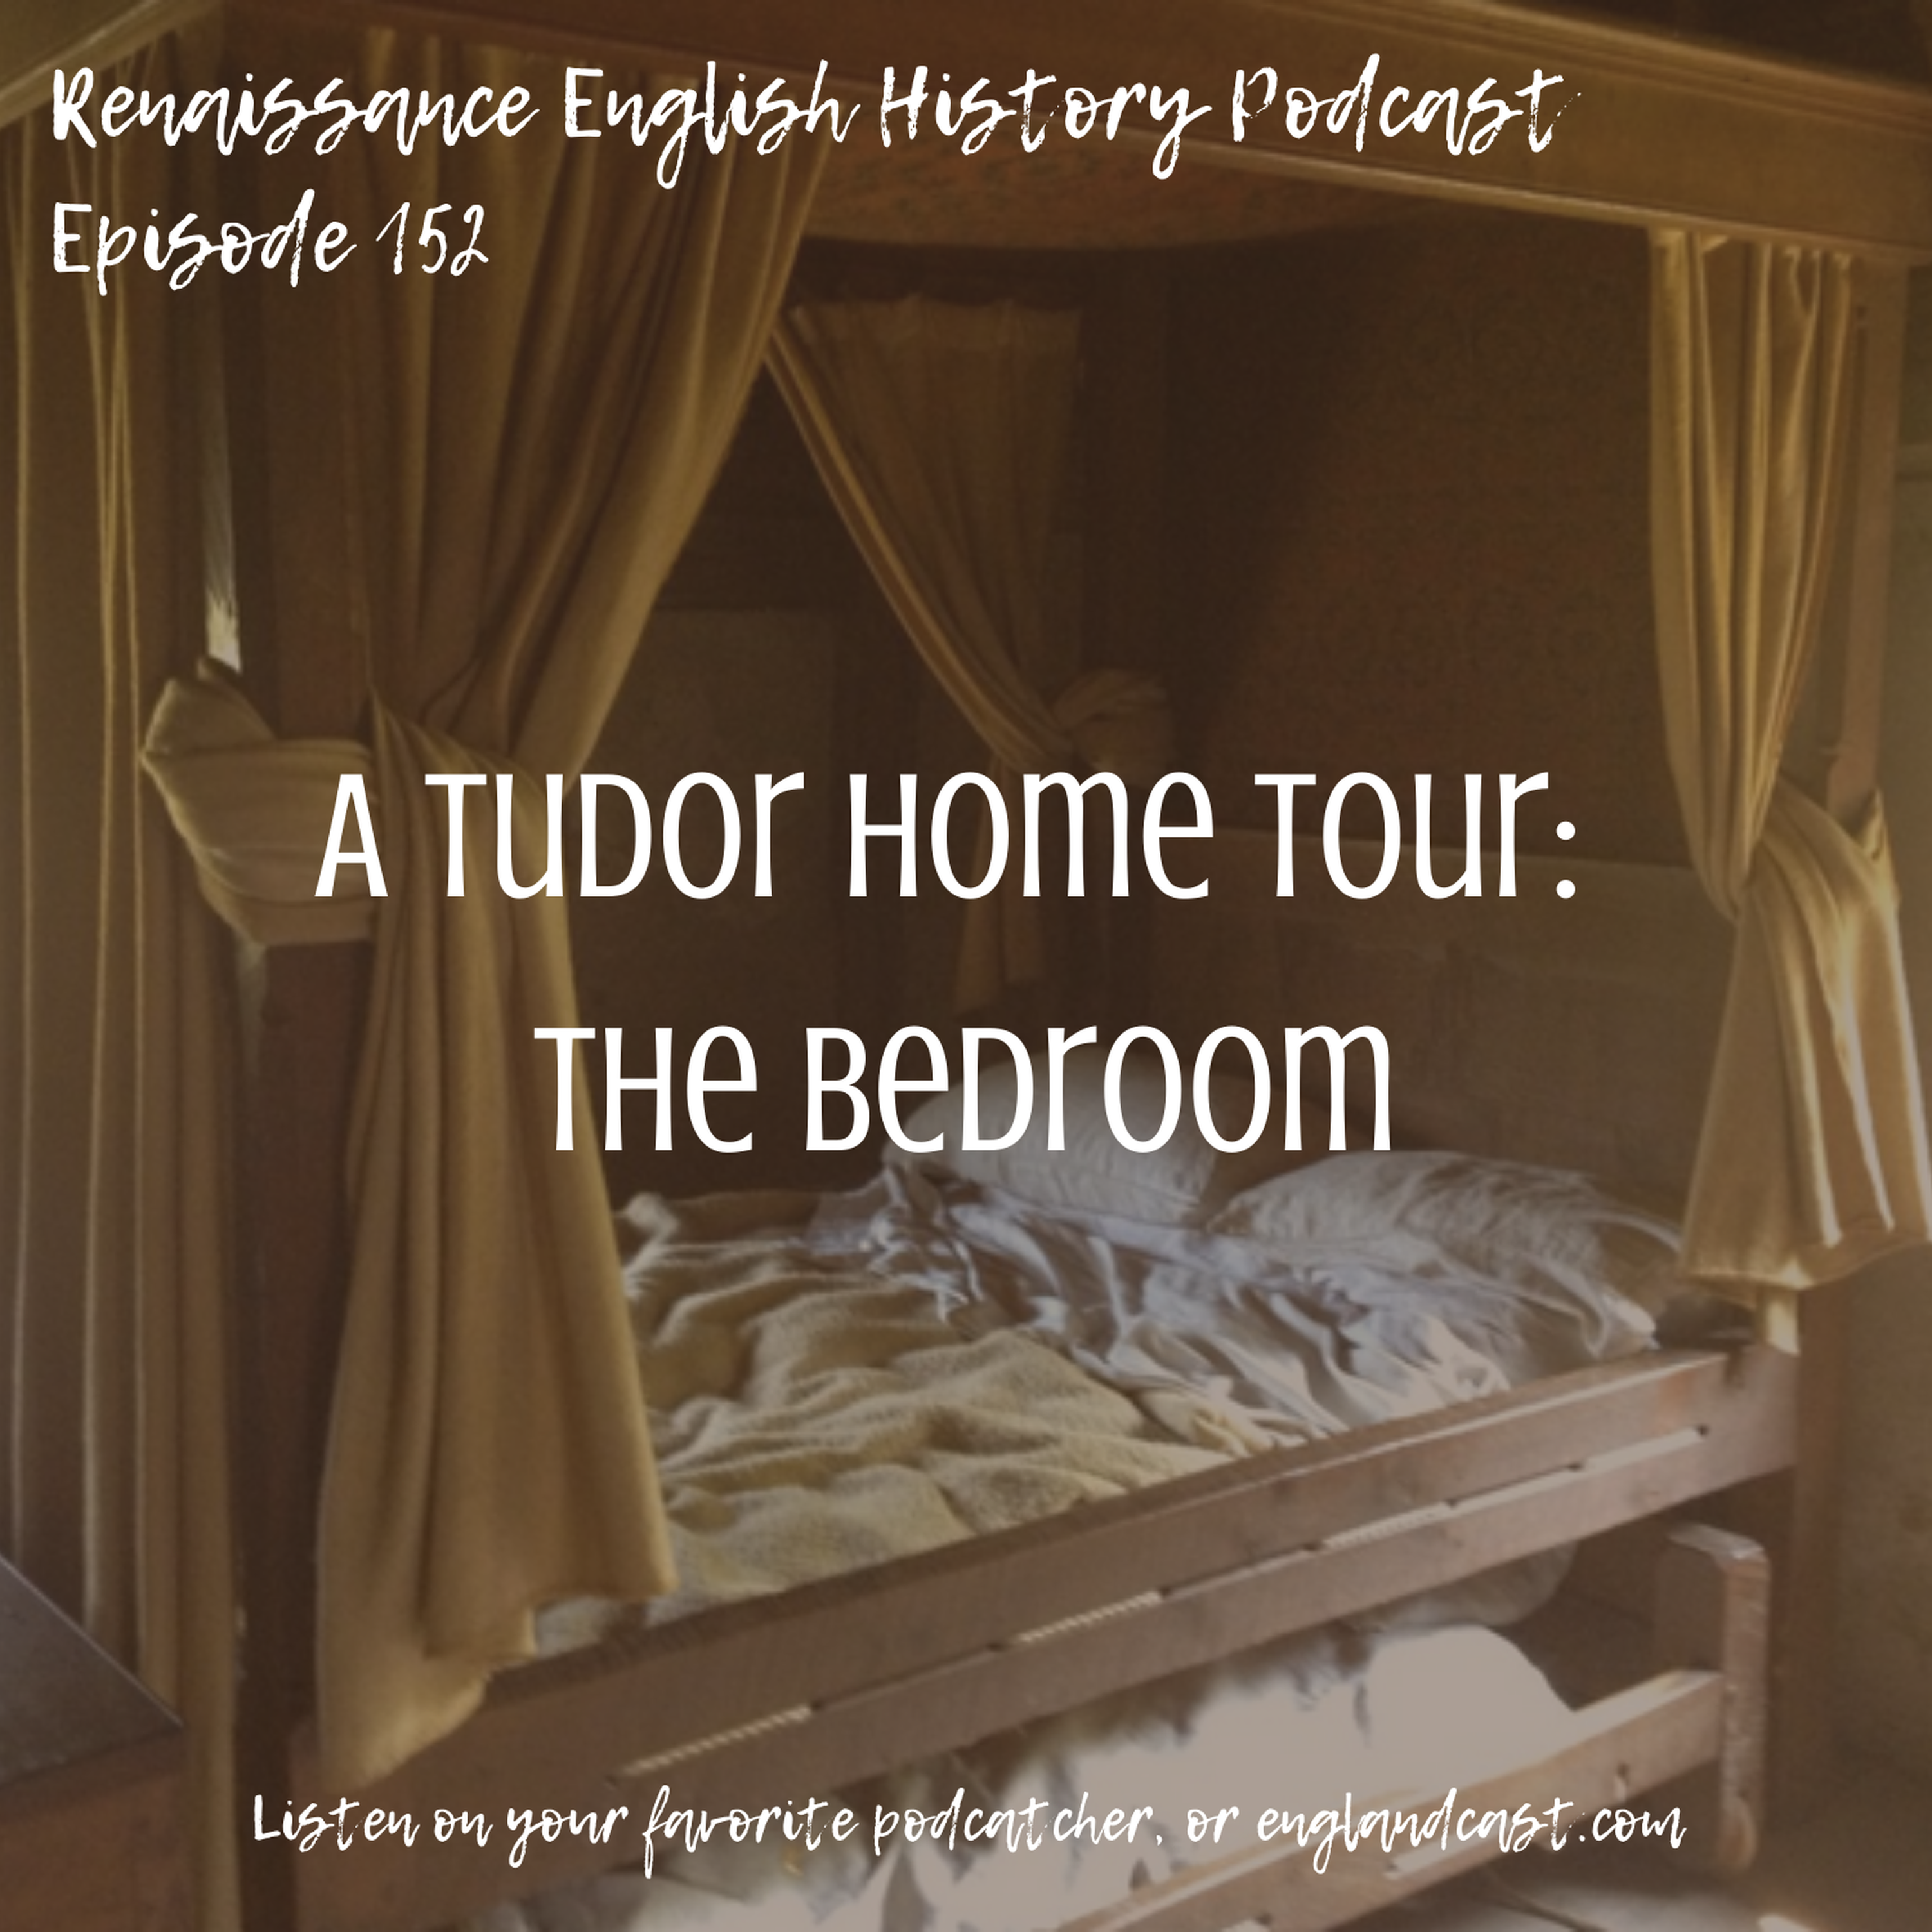 Episode 152: The Tudor Home Tour - the Bedroom